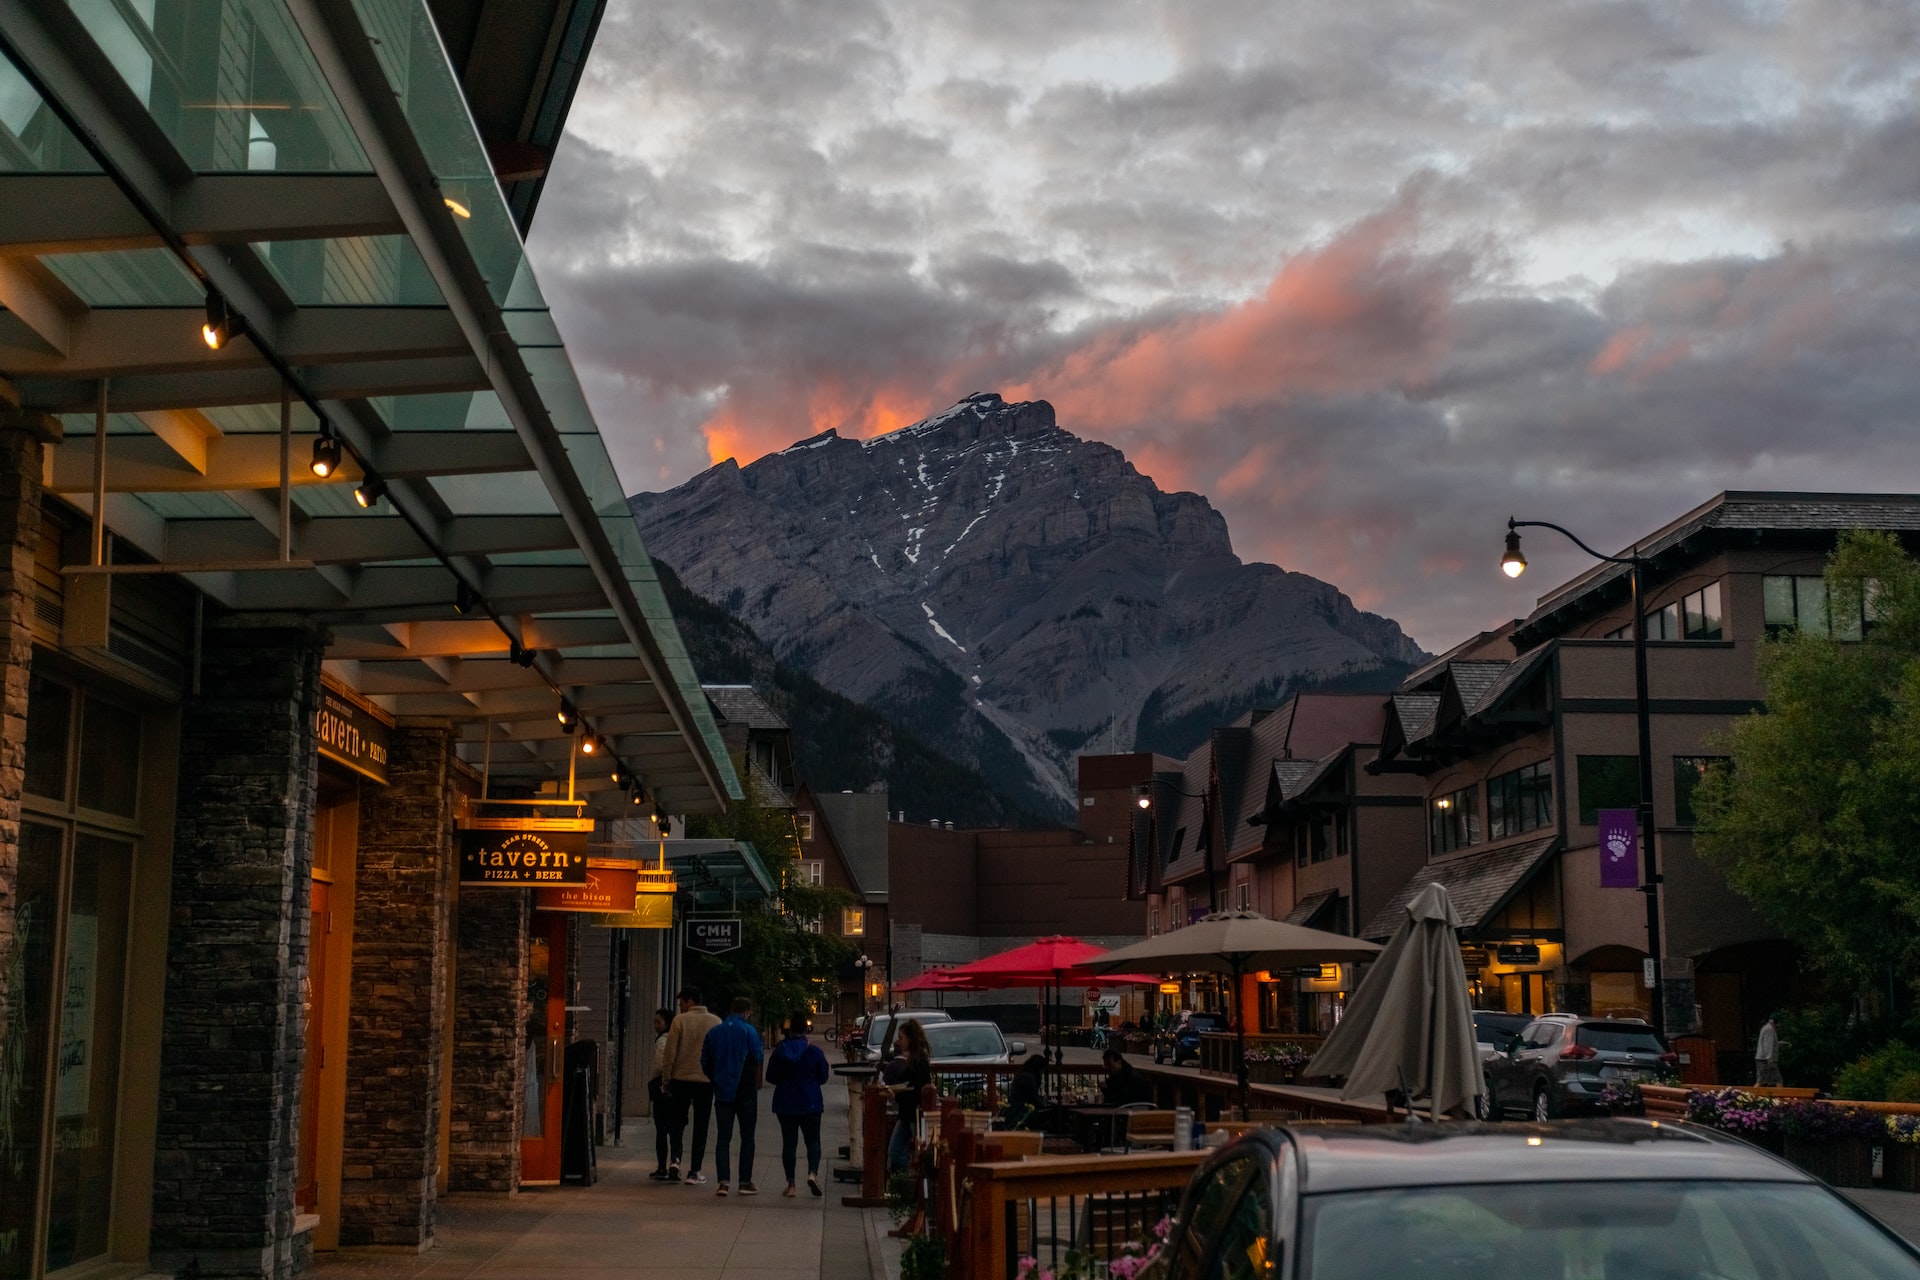 Downtown Banff at sunset. Some nice orange clouds surrounding Cascade Mountain.